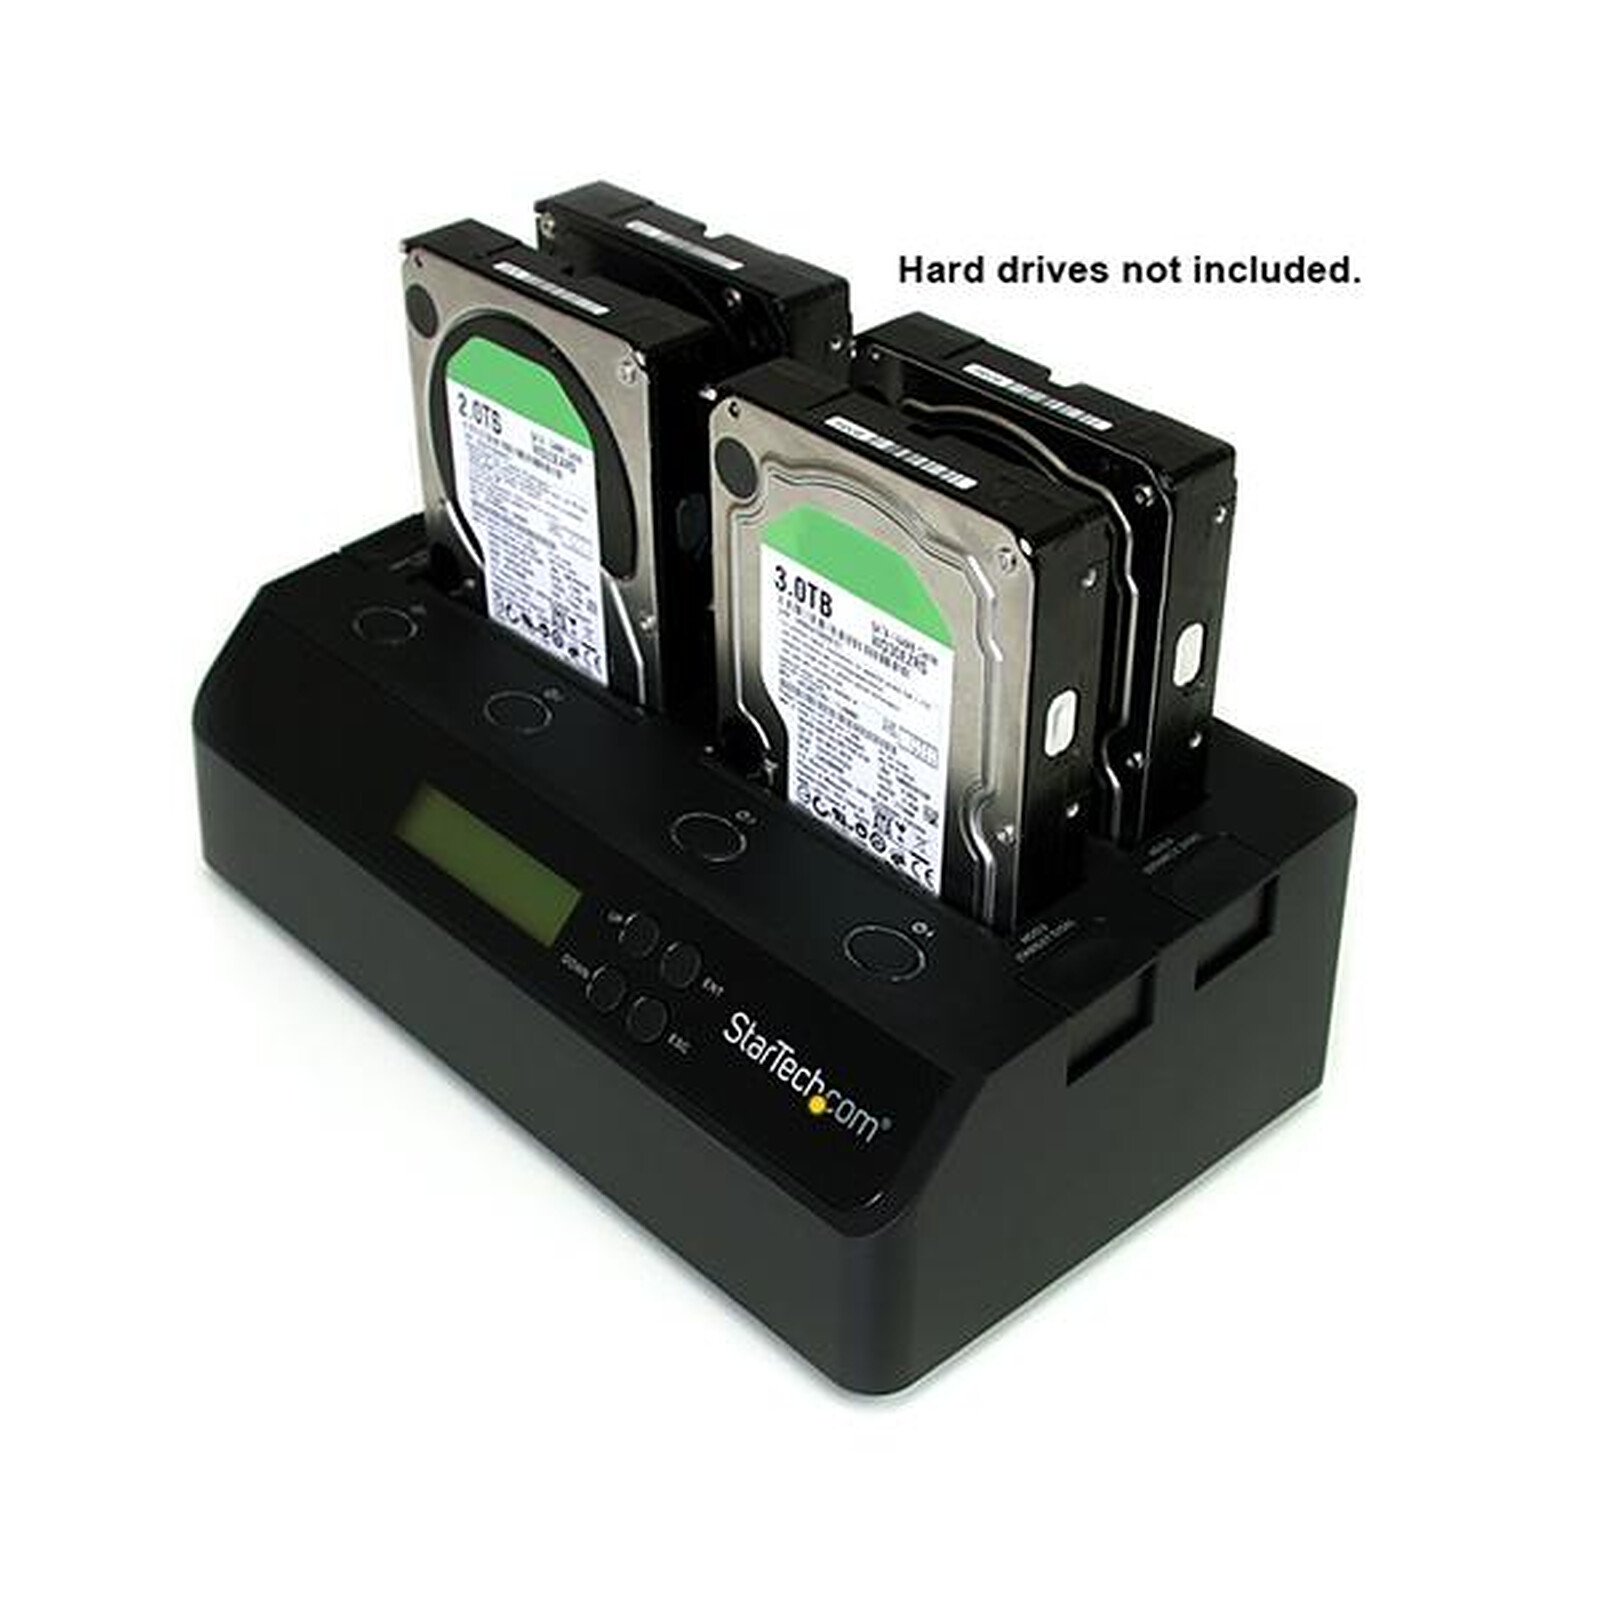 Ide Sata Dual All In 1 Hdd Dock Station d'accueil Disque dur